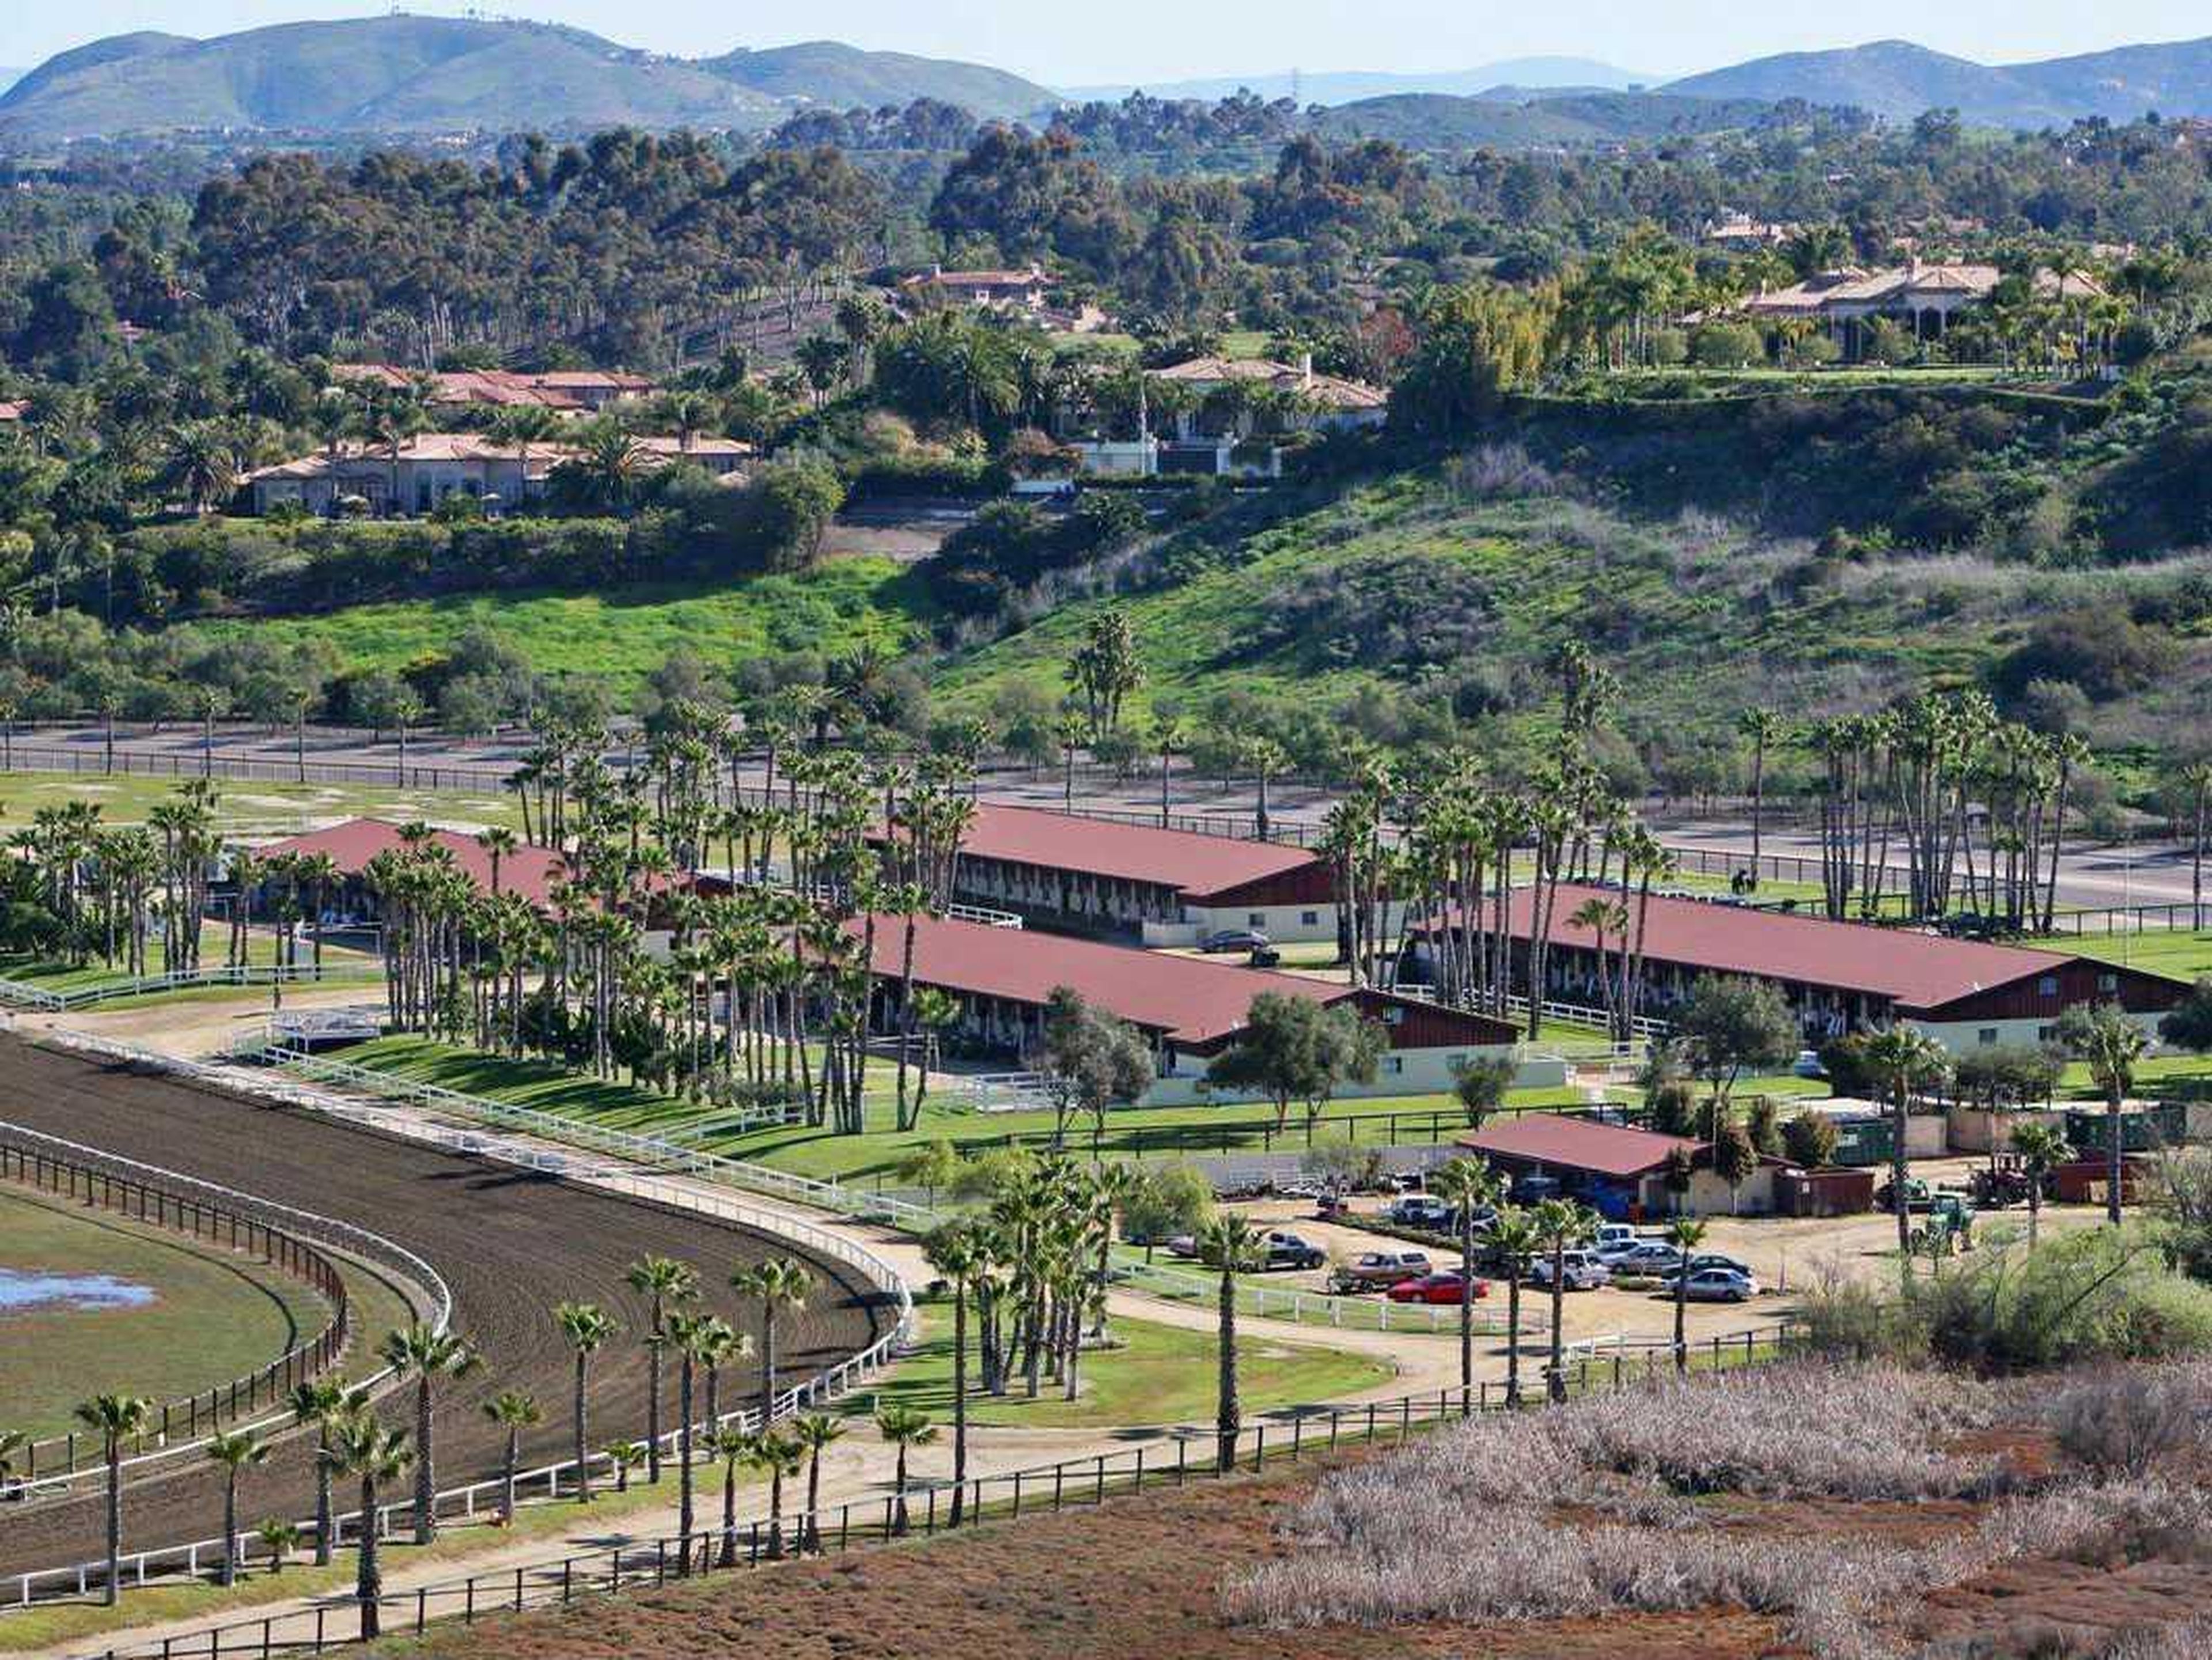 In California, he owns the 228-acre Rancho Paseana, which he purchased for $18 million. It includes a racetrack, orchard, and five barns.